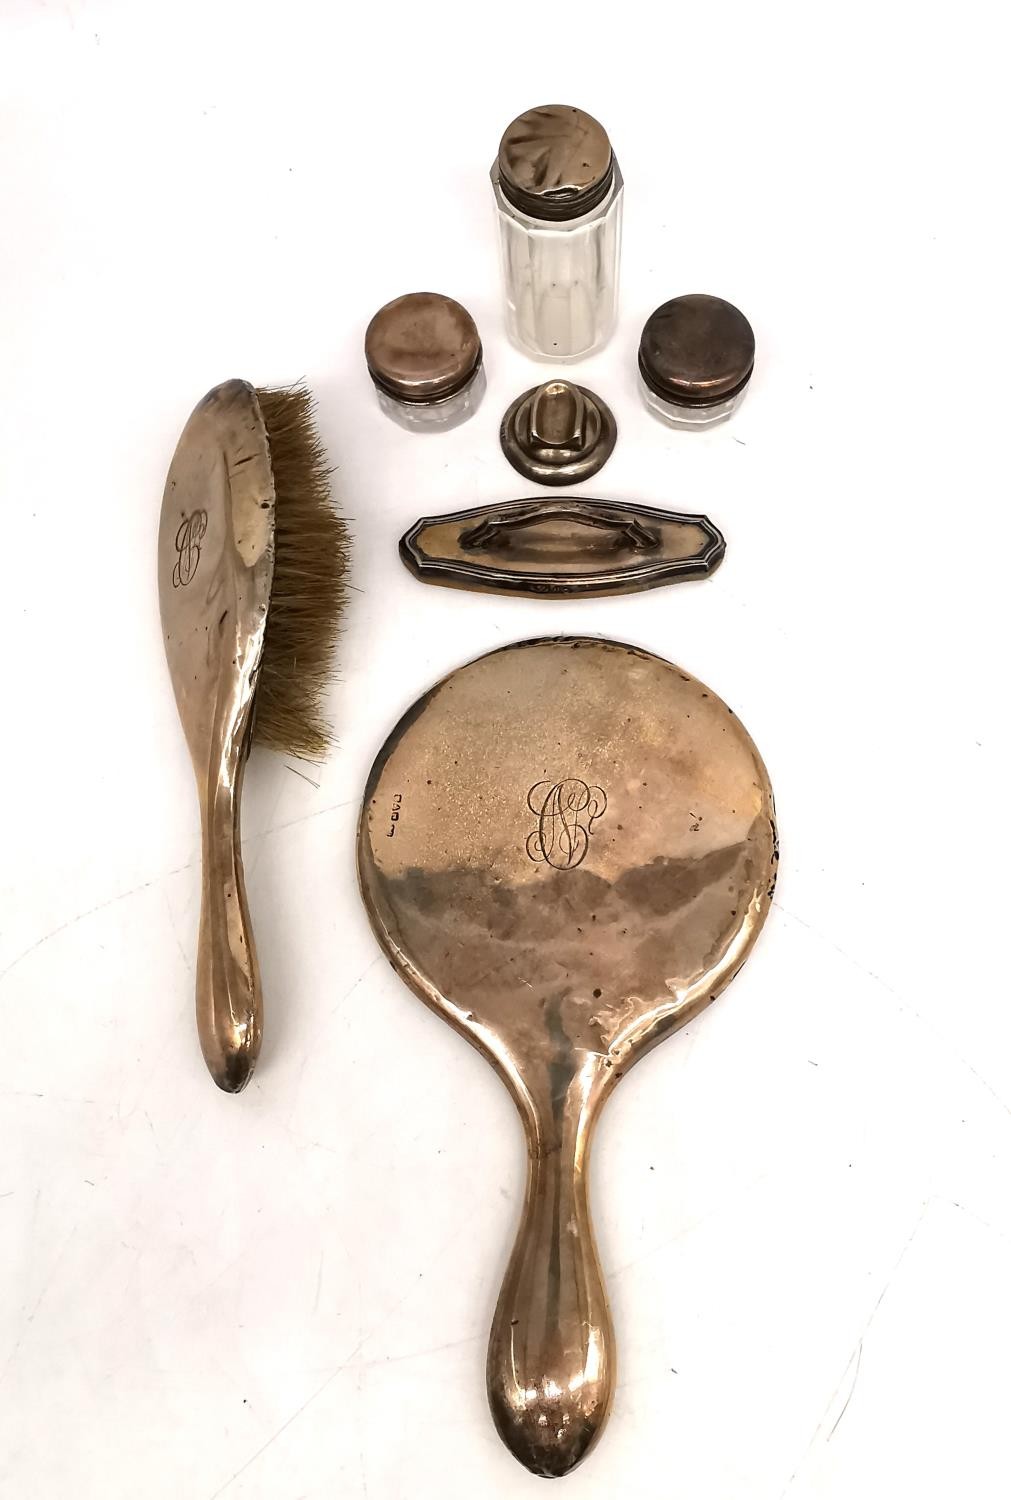 An Edwardian silver dressing table set by William Atkinson, consisting of a hand mirror, a hair